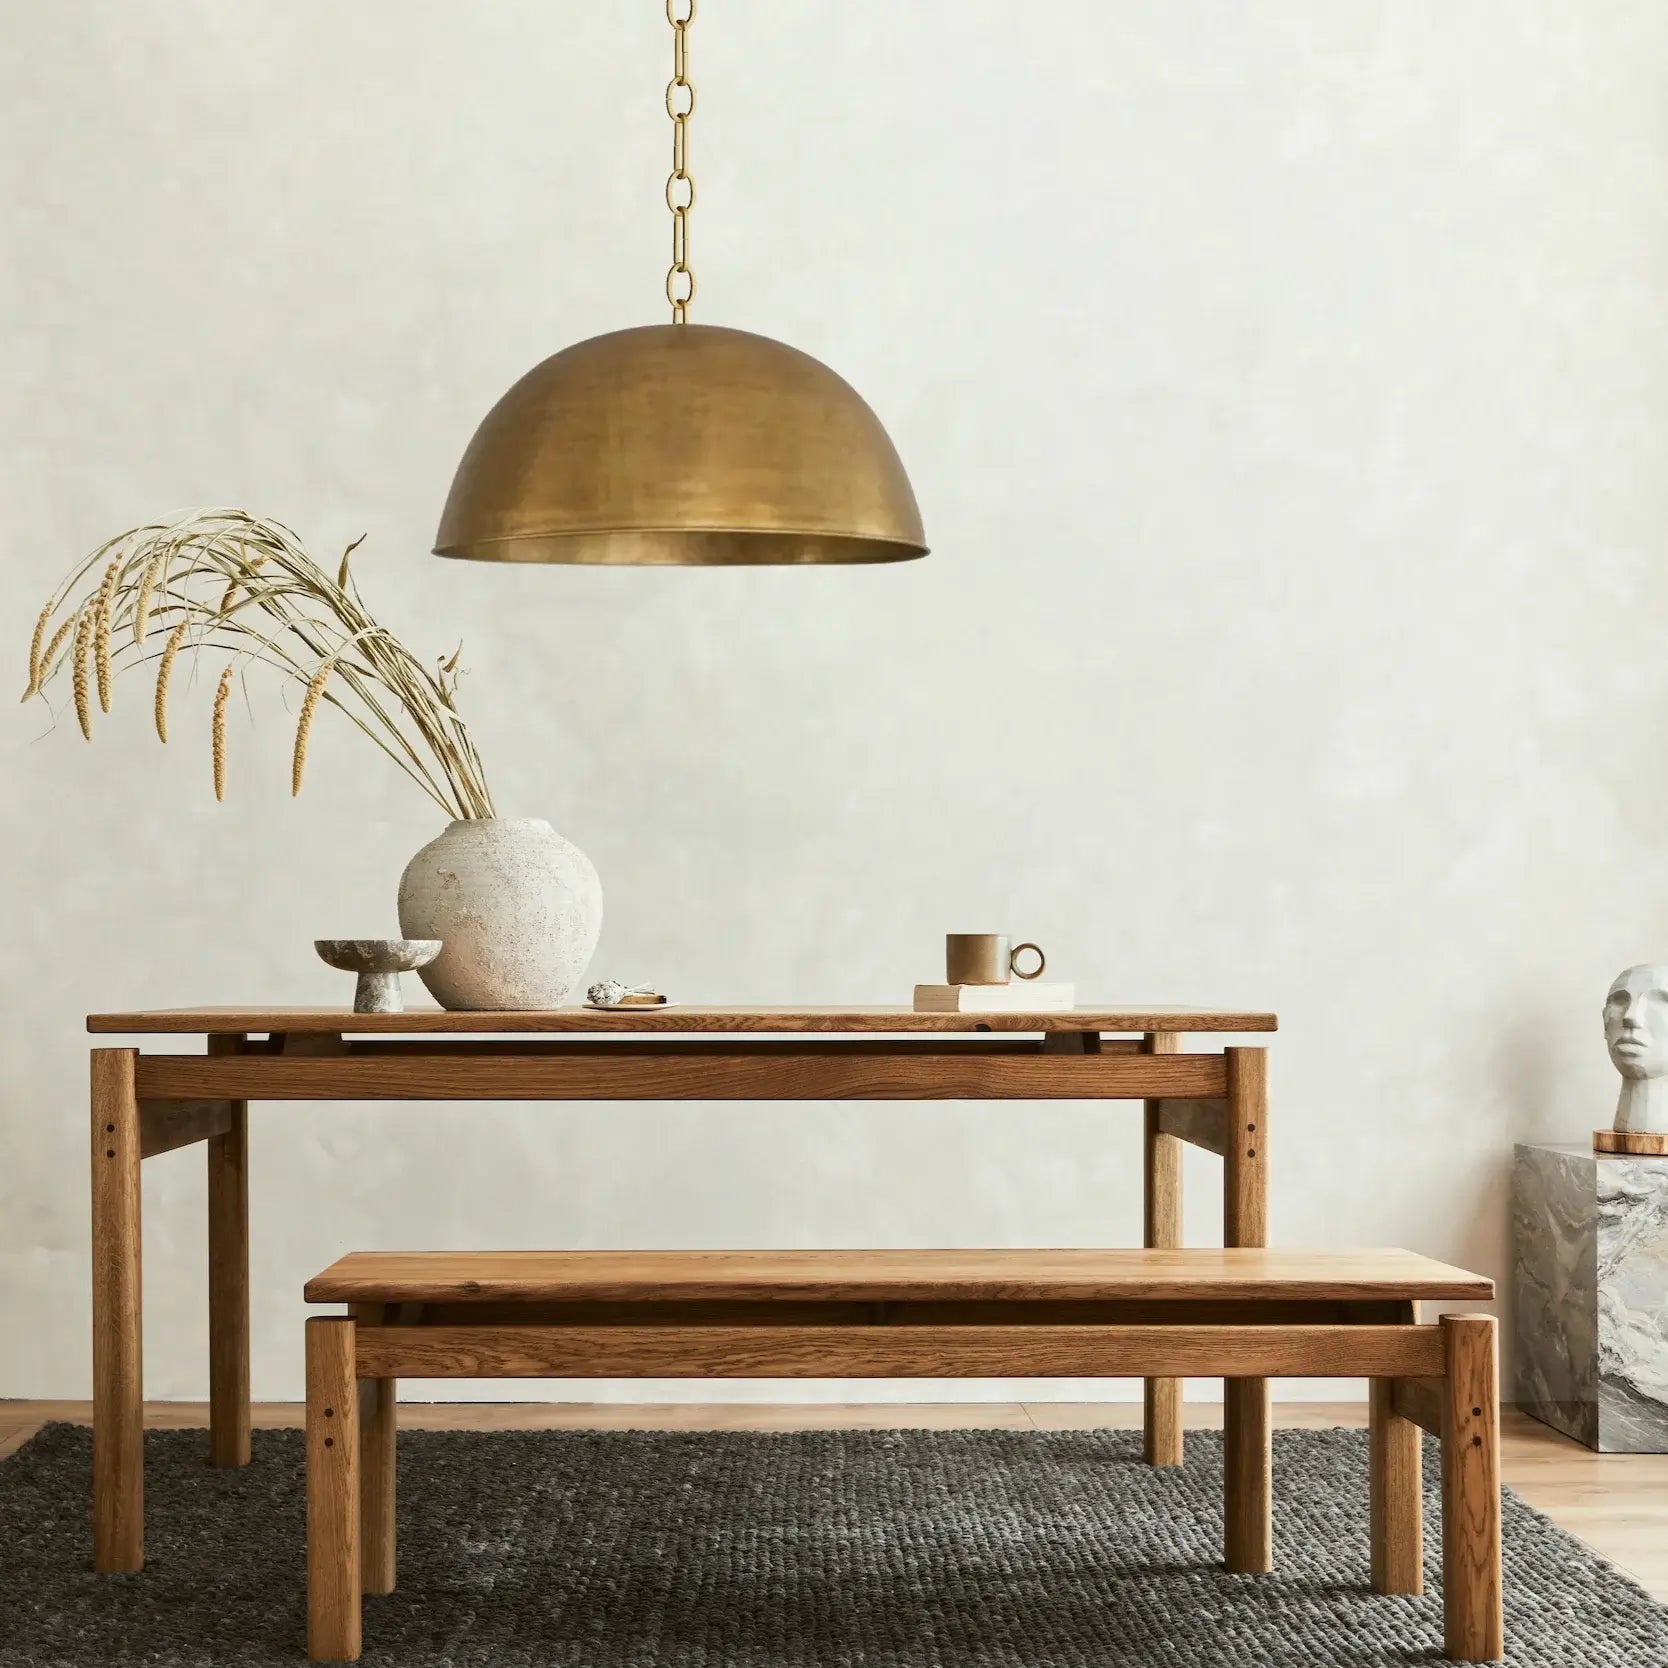 Dounia home Pendant light in Antique brass made of Metal, used as a dining room lighting, Model: Quba lagre Dome